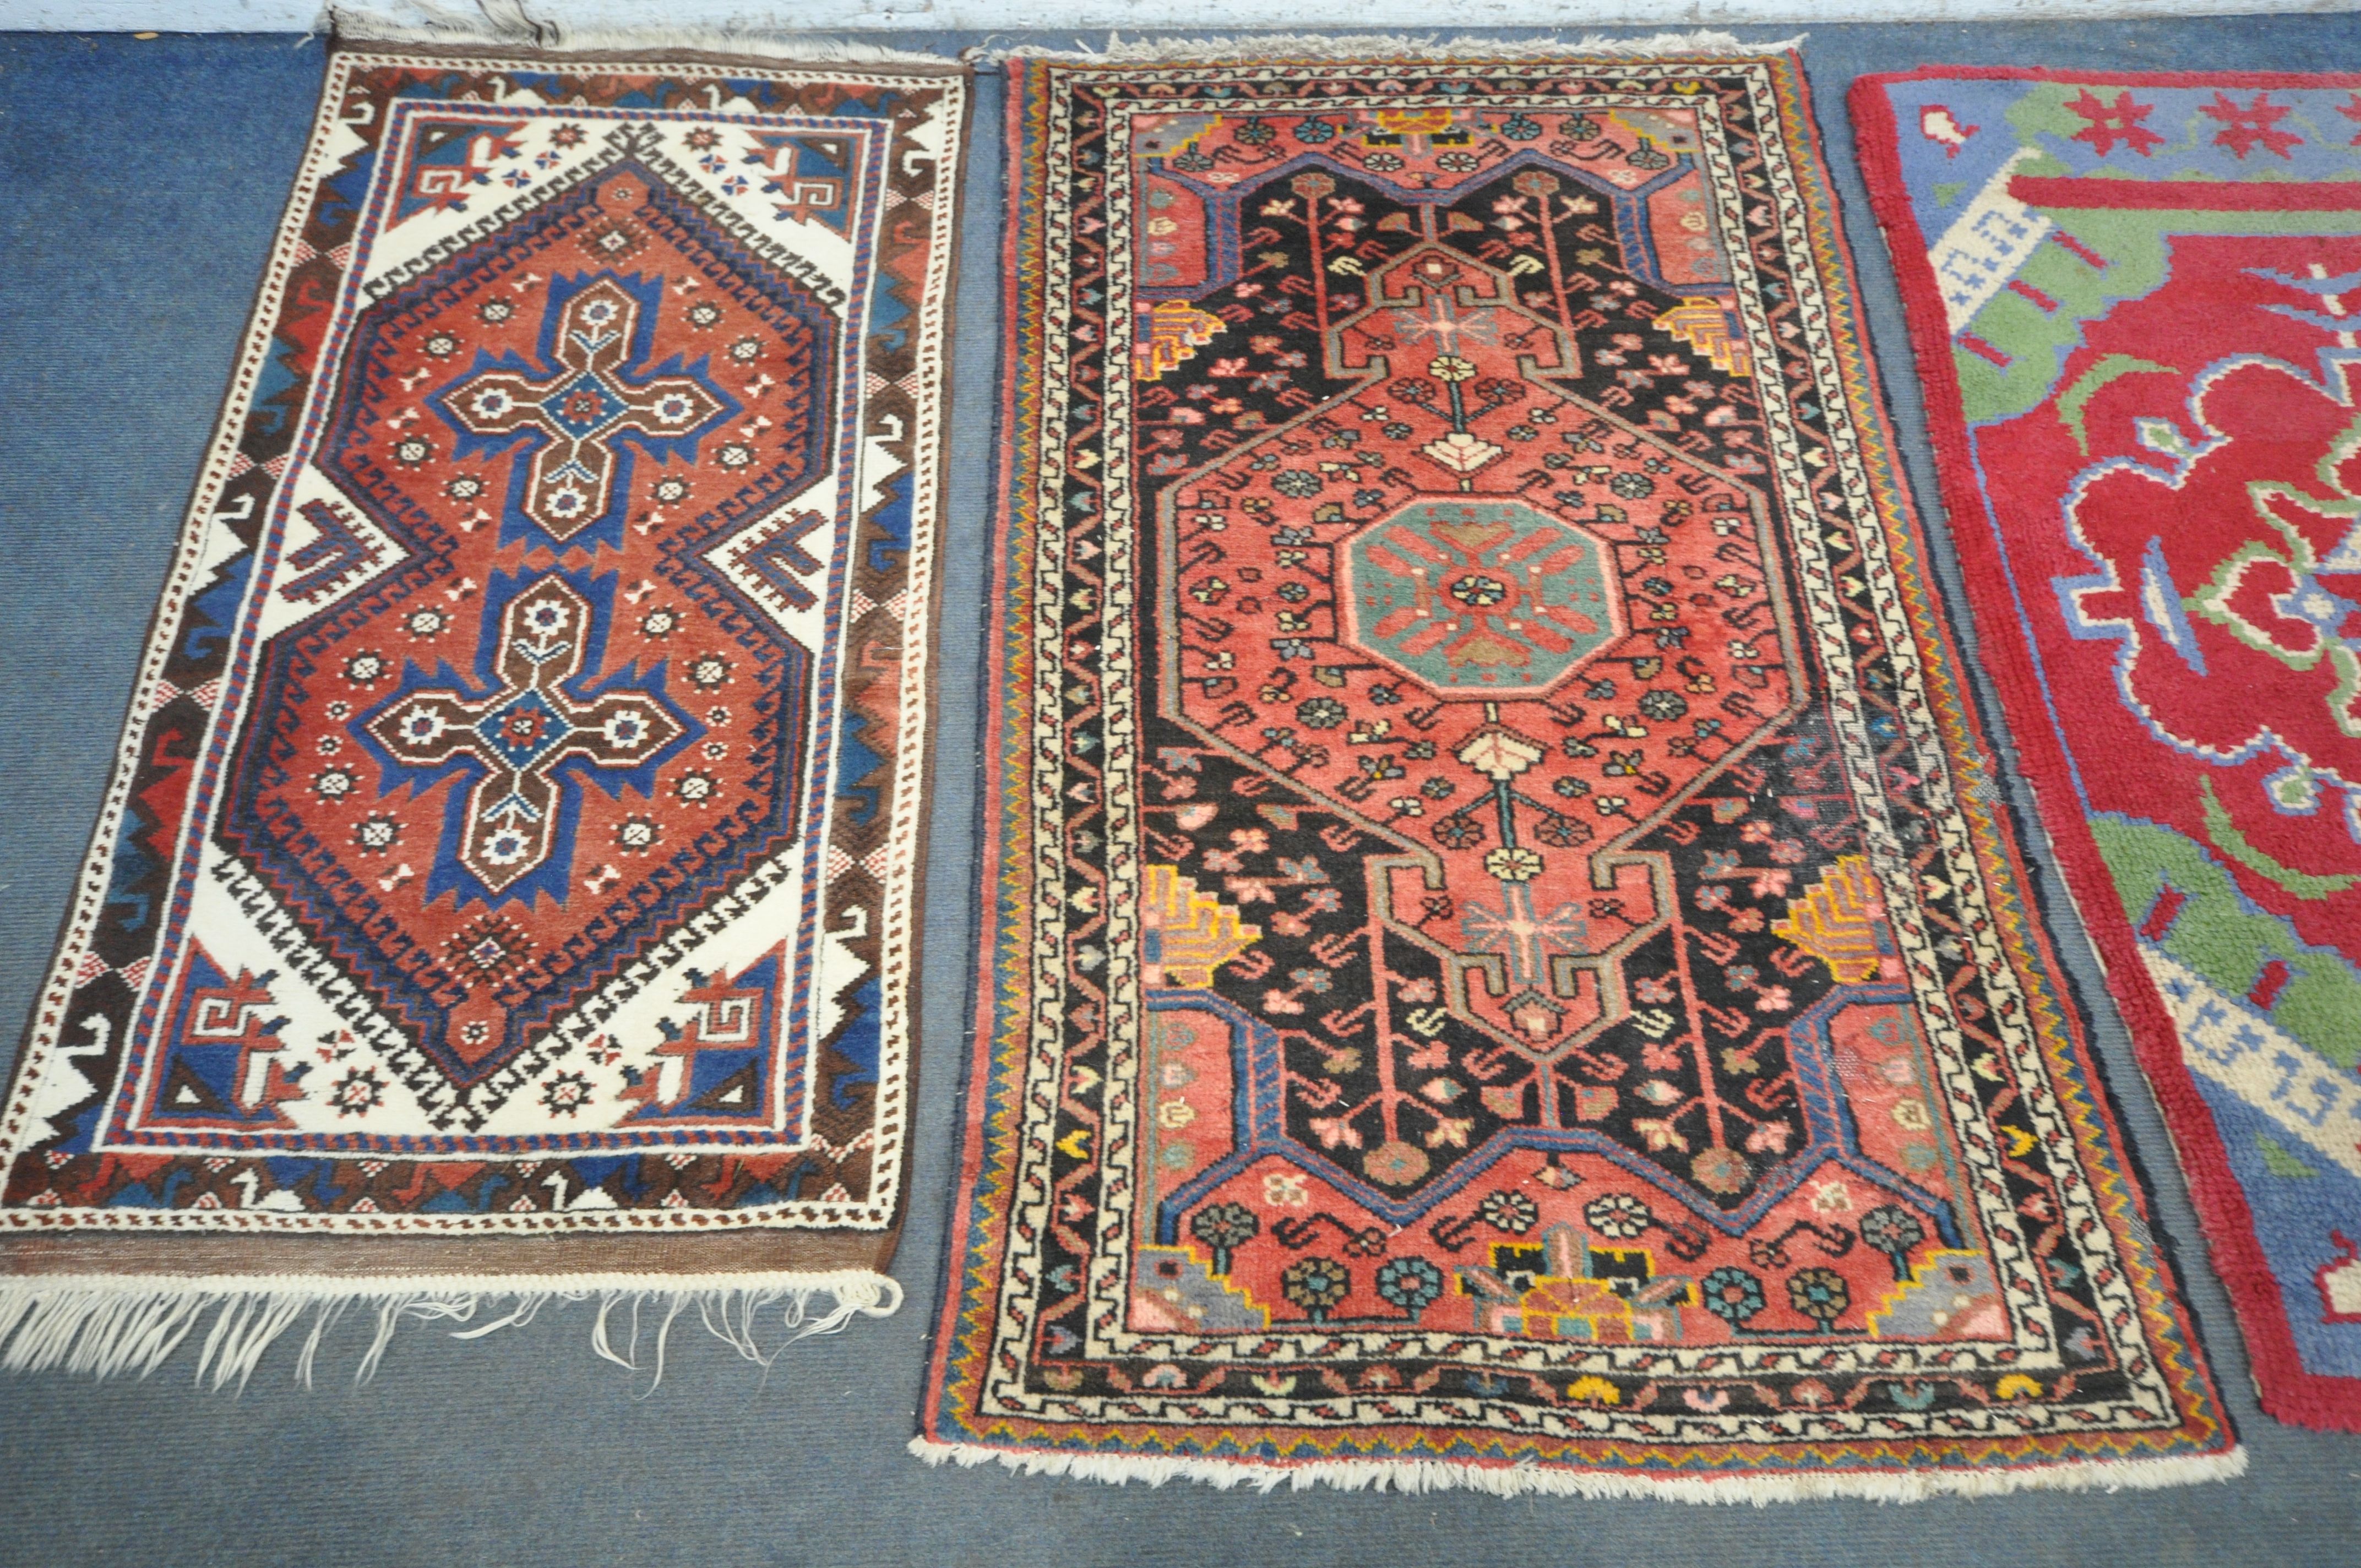 TWO WOOL PERSIAN RUGS, both of similar patterns, largest rug measurements, 155cm x 97cm, along - Image 2 of 6